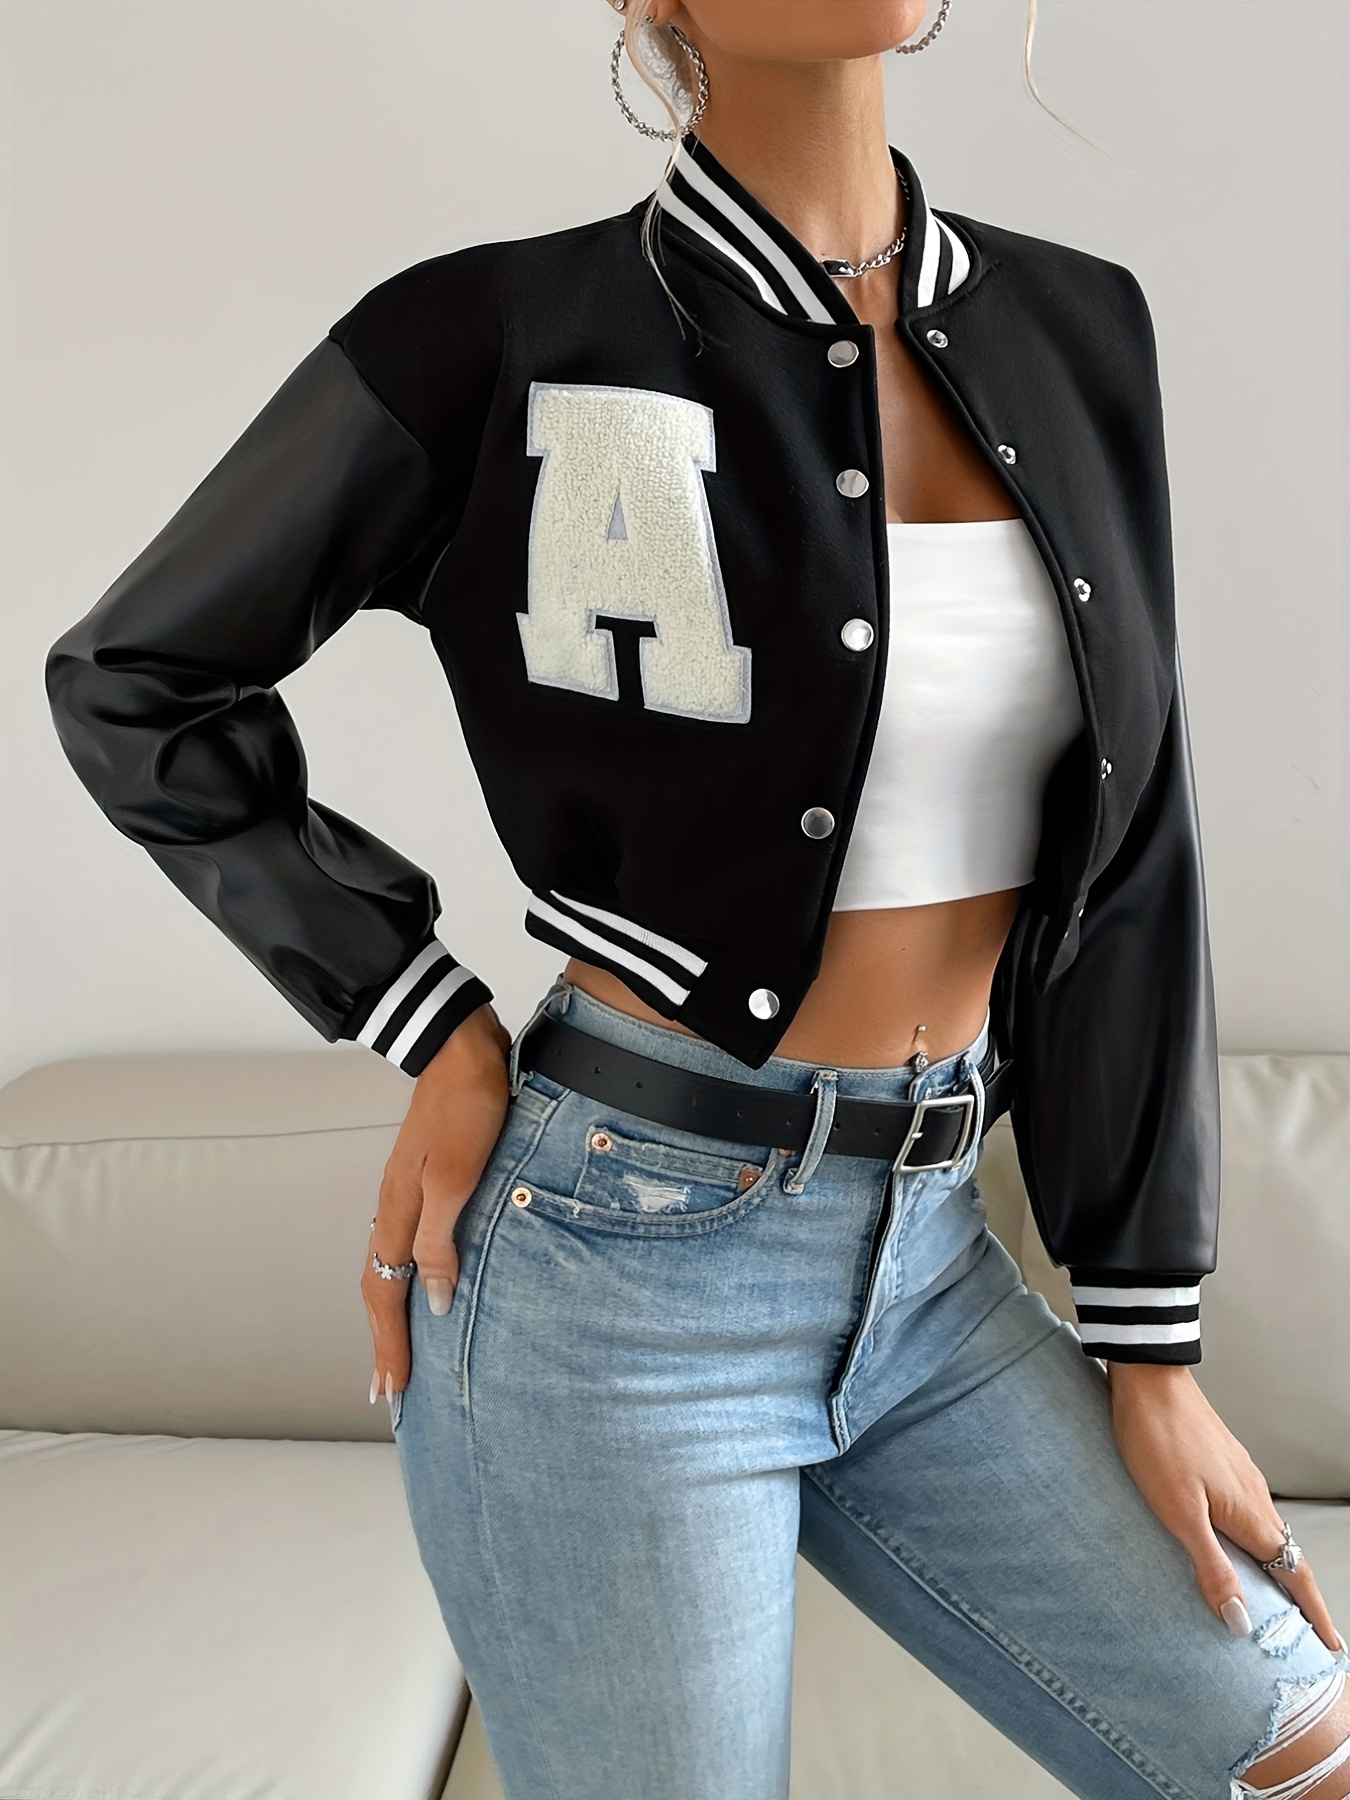 brown varsity jacket outfit for women｜TikTok Search